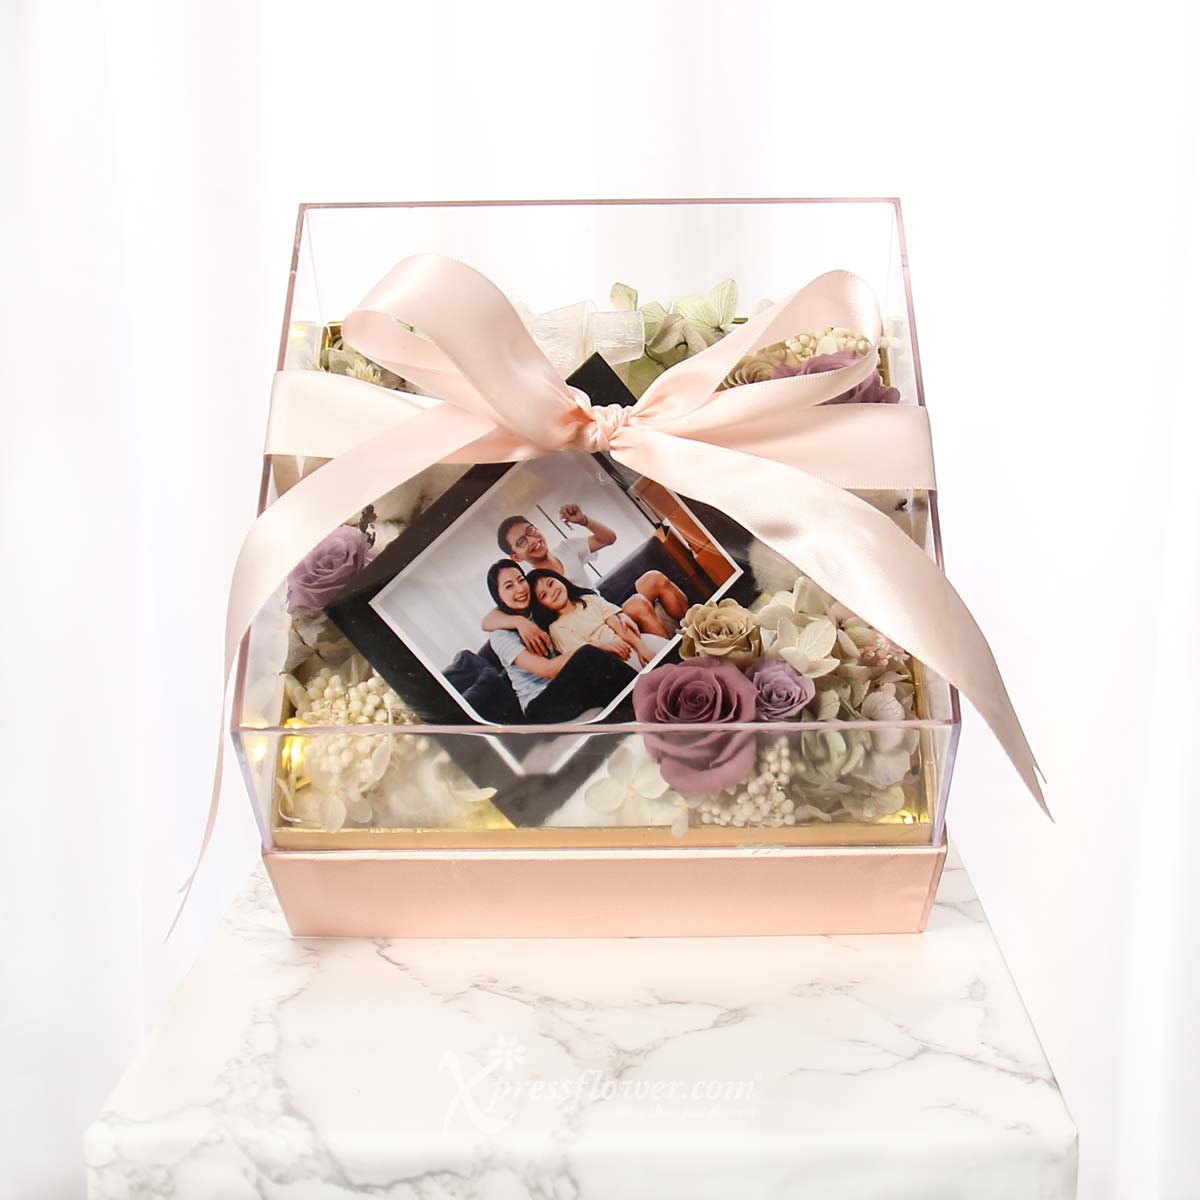 Delicate Intentions (Preserved Flowers with personalised photo and LED lights)